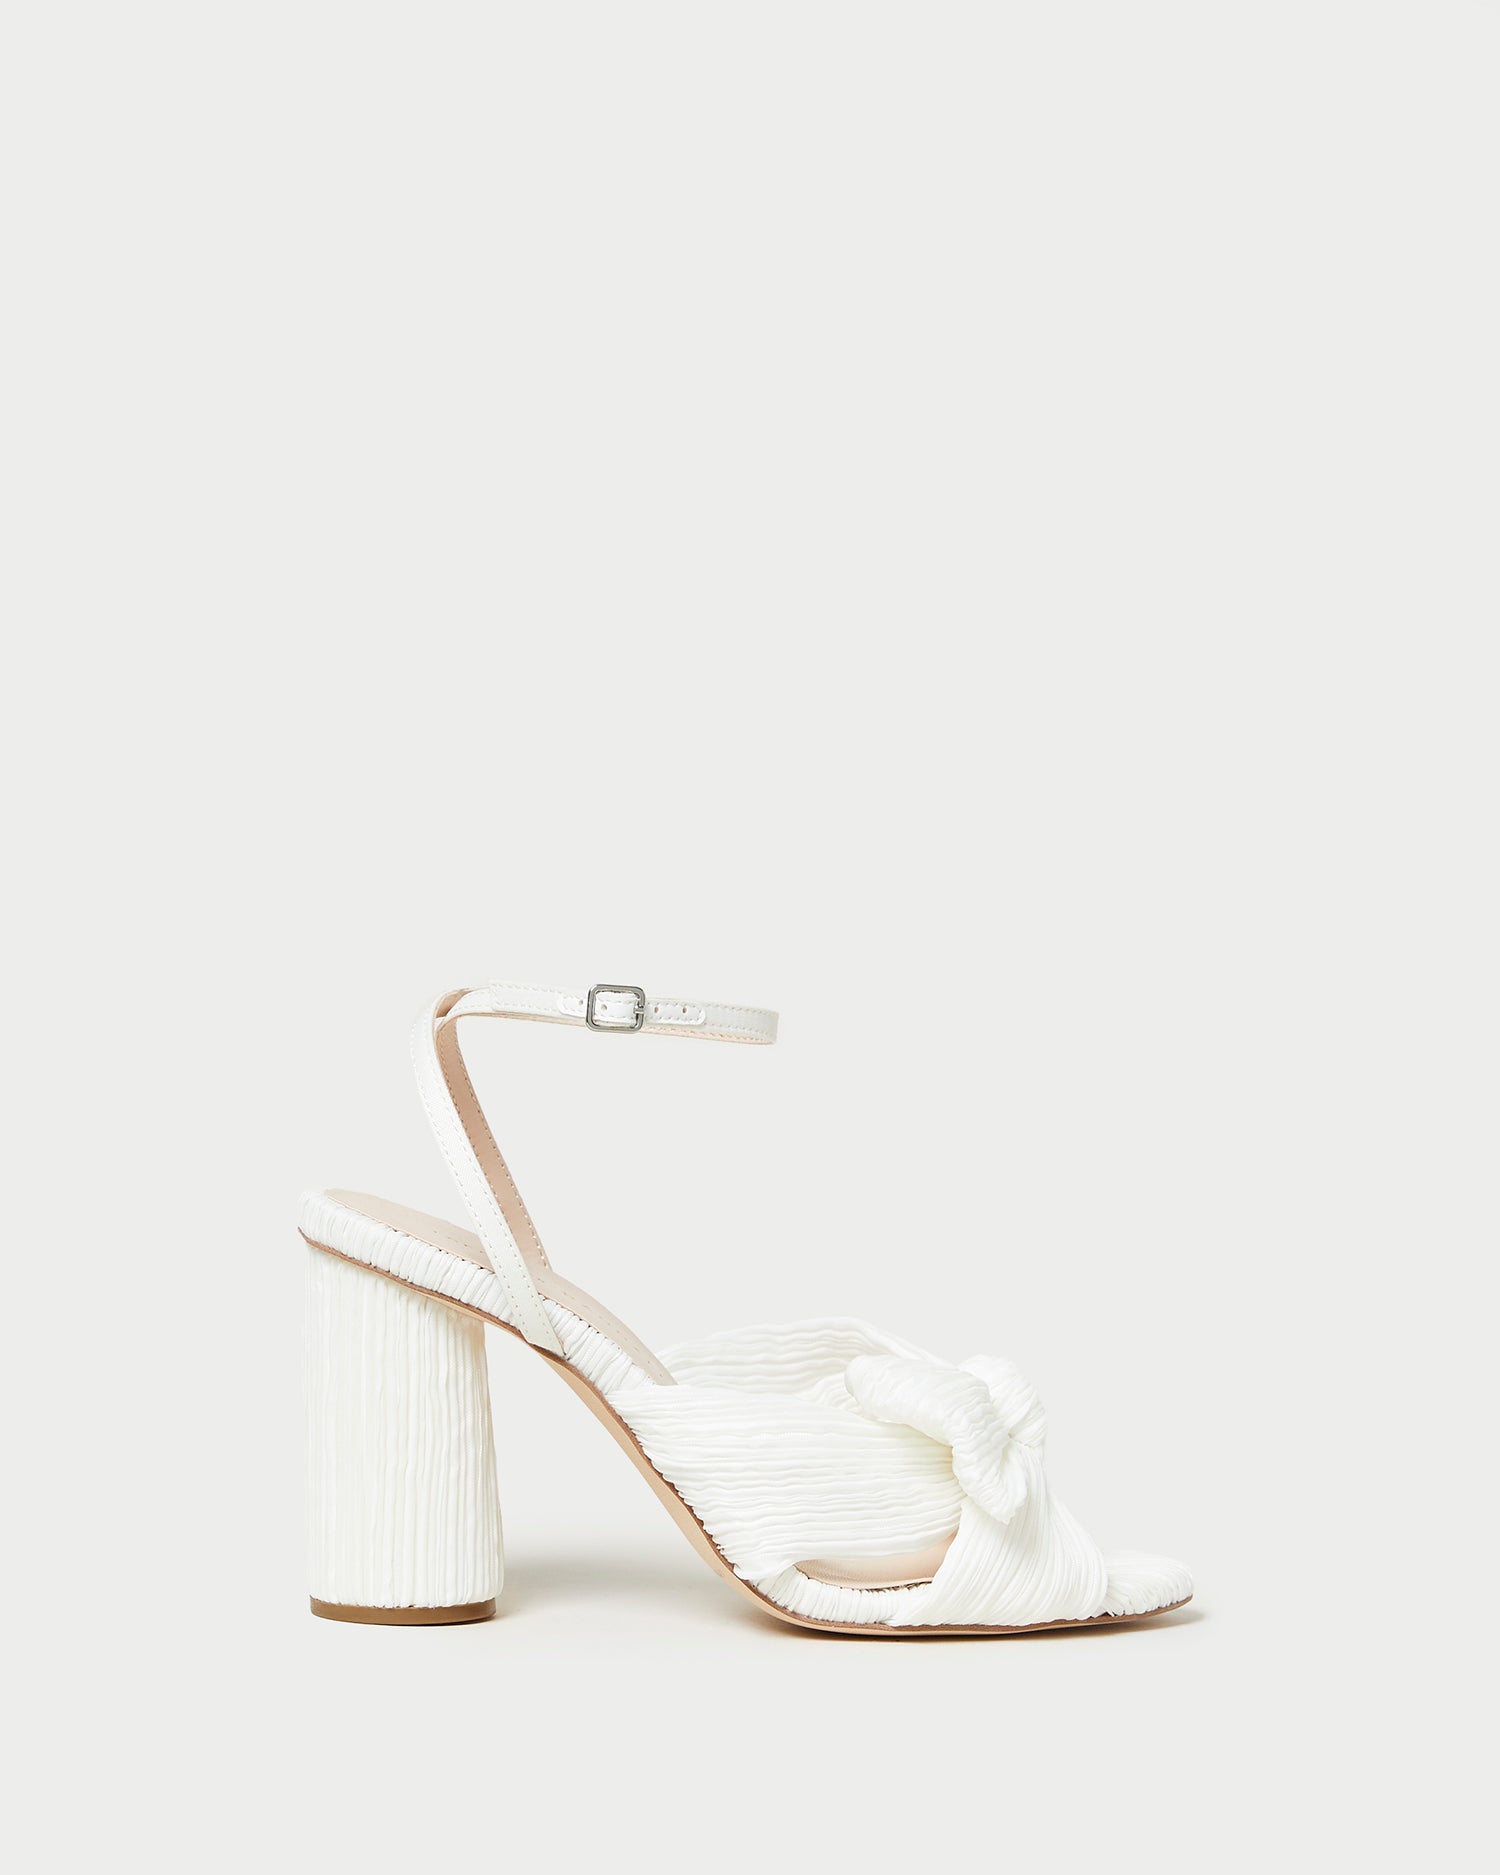 22 Bridal Block Heel Wedding Shoes That Are Perfectly Chunky